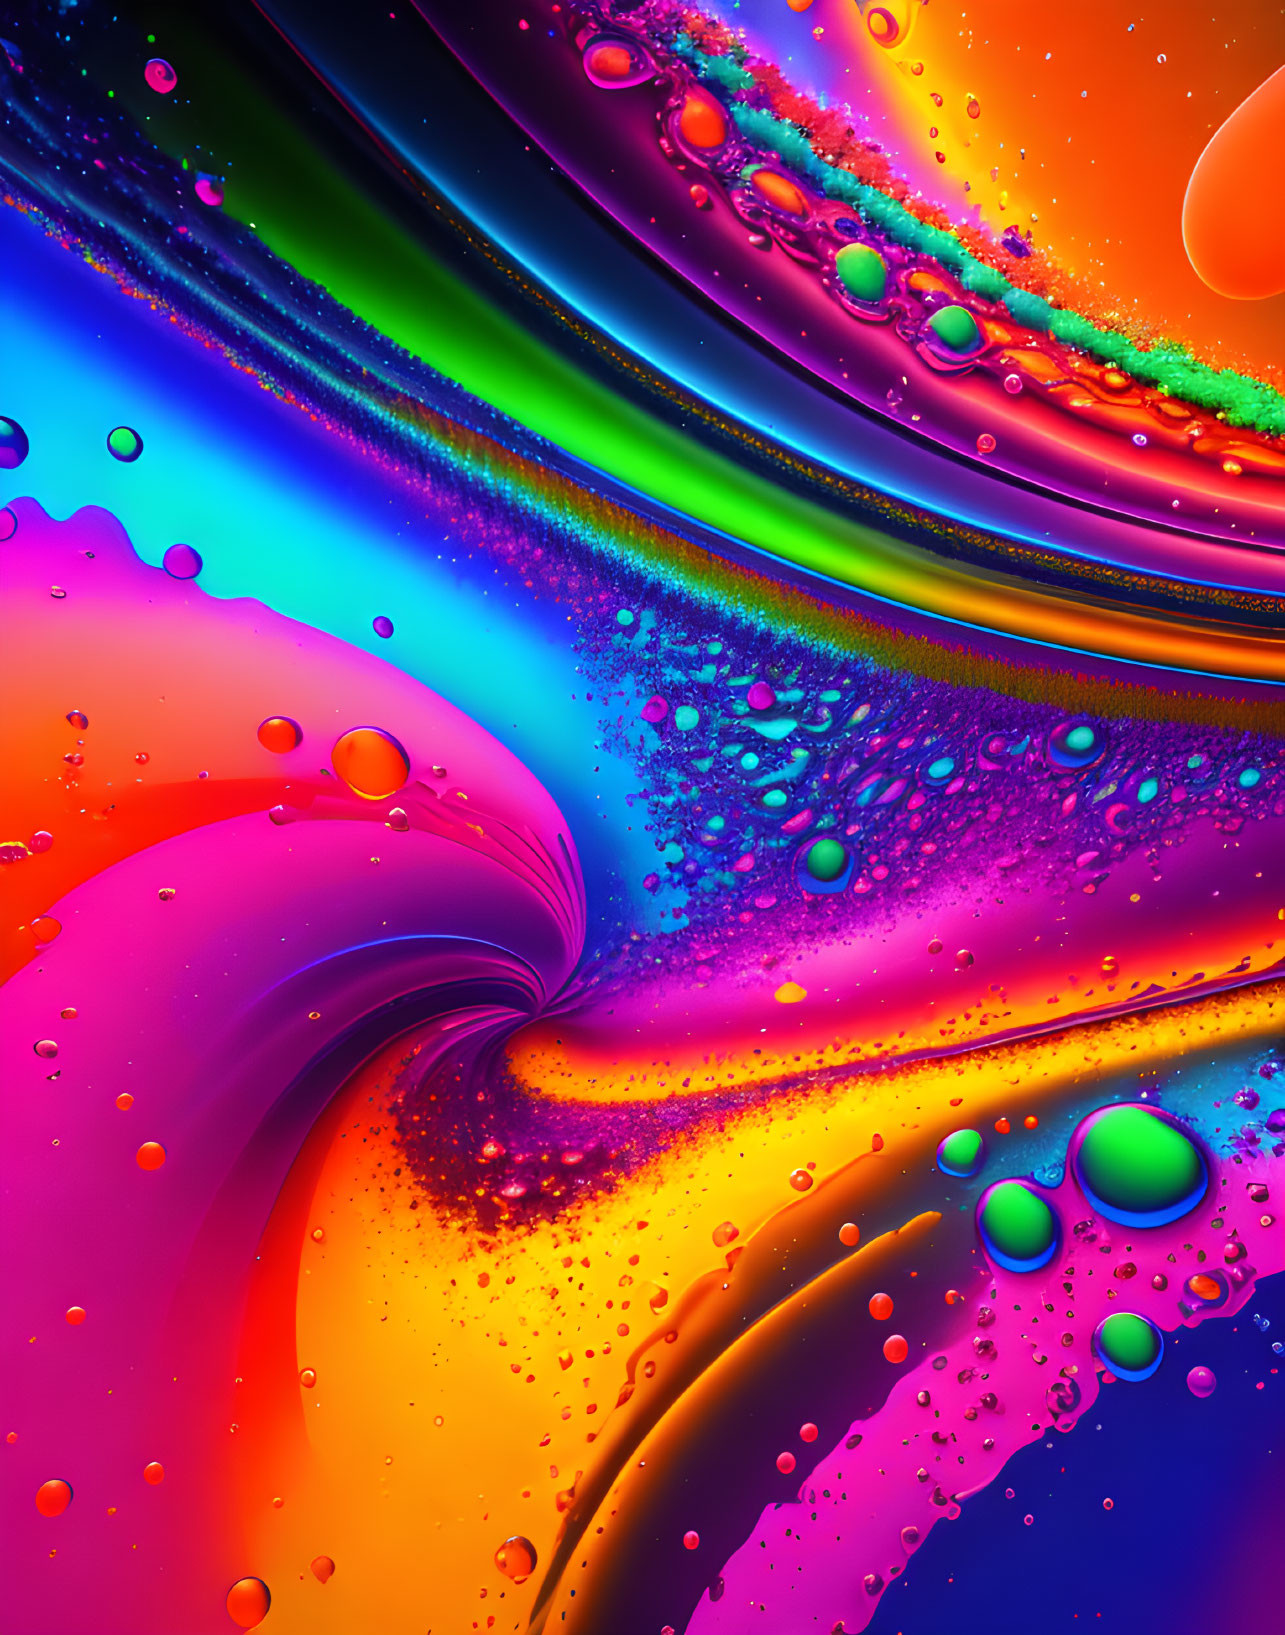 Colorful Abstract Art: Swirling Rainbow Patterns with Water Droplets